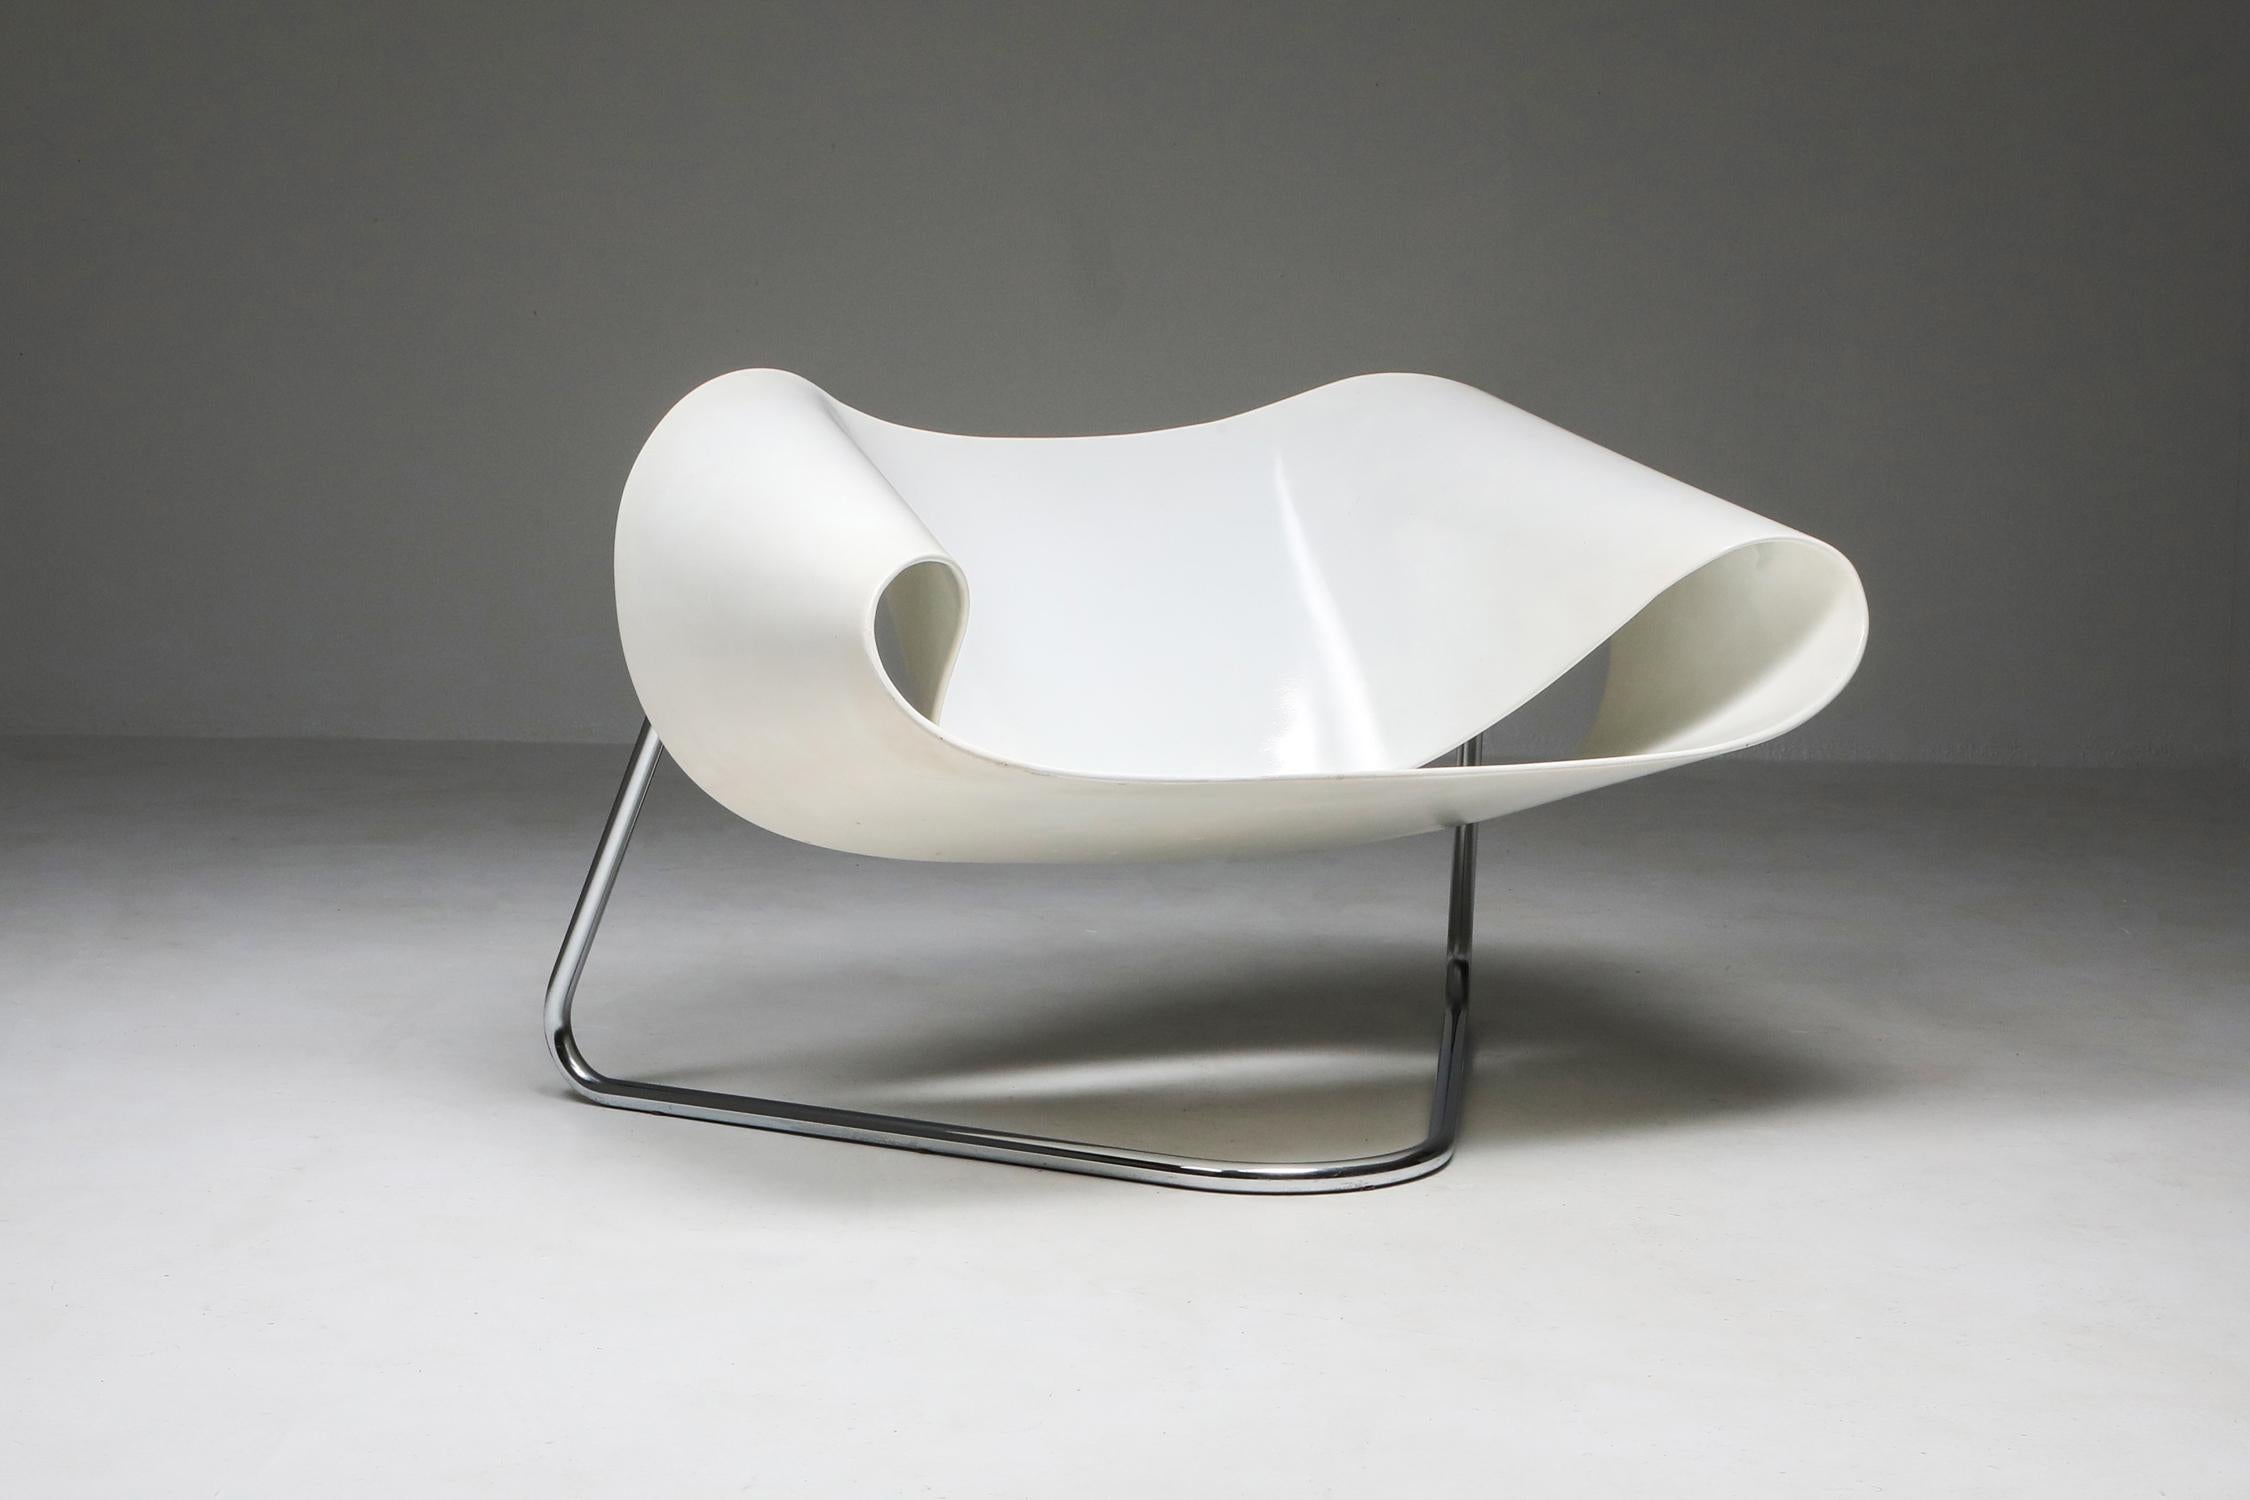 Franca Stagi, CL9 ribbon chair, white, Bernini, Italy, circa 1961 

Moulded fibreglass seating section on chrome tubular base. 

Gorgeous high-end piece by a female designer, in original condition.

The ribbon is a symbol of awareness and